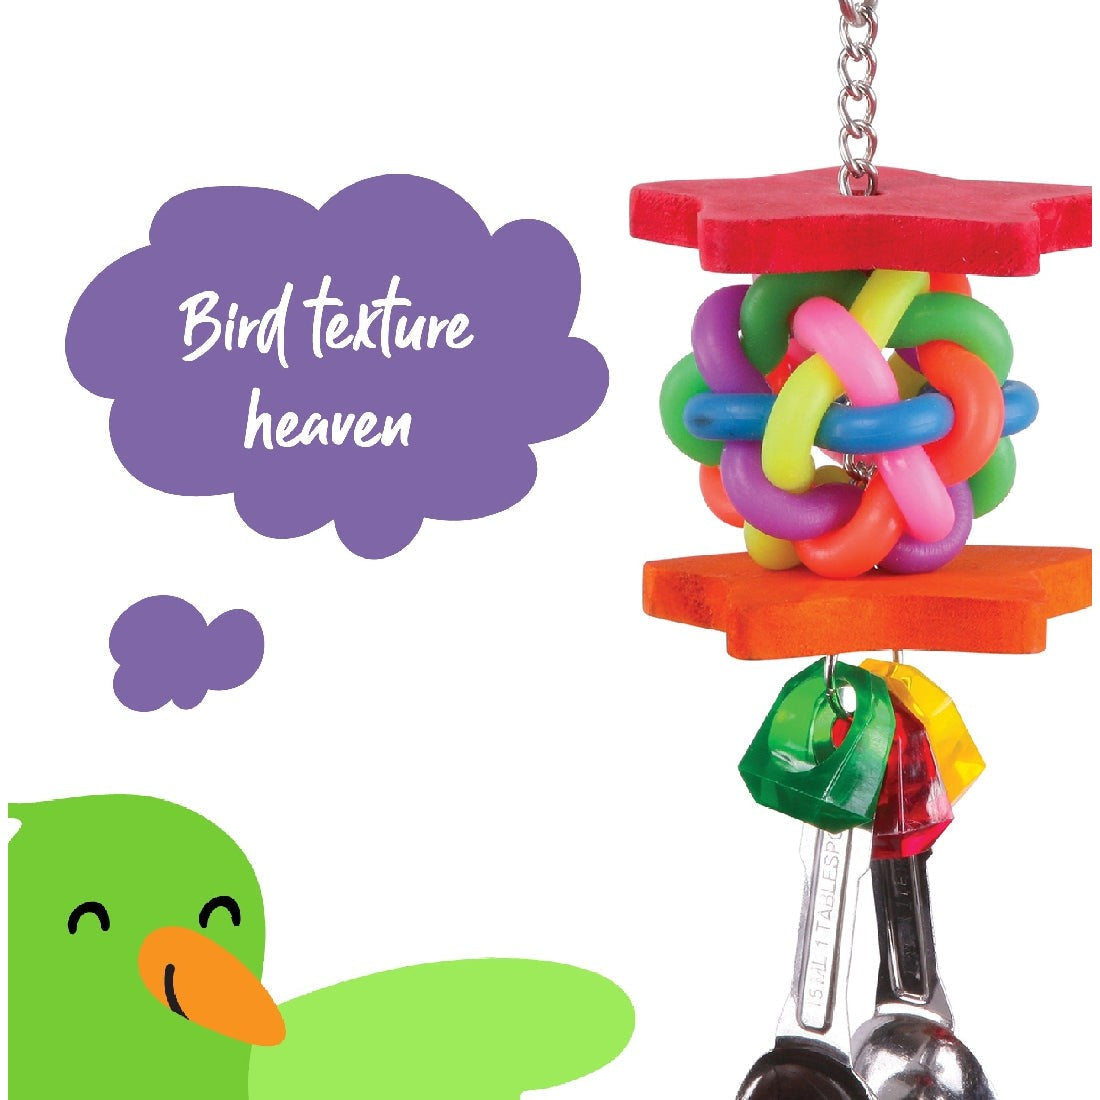 Colorful bird toy with text "Bird texture heaven," chain, and wooden blocks.